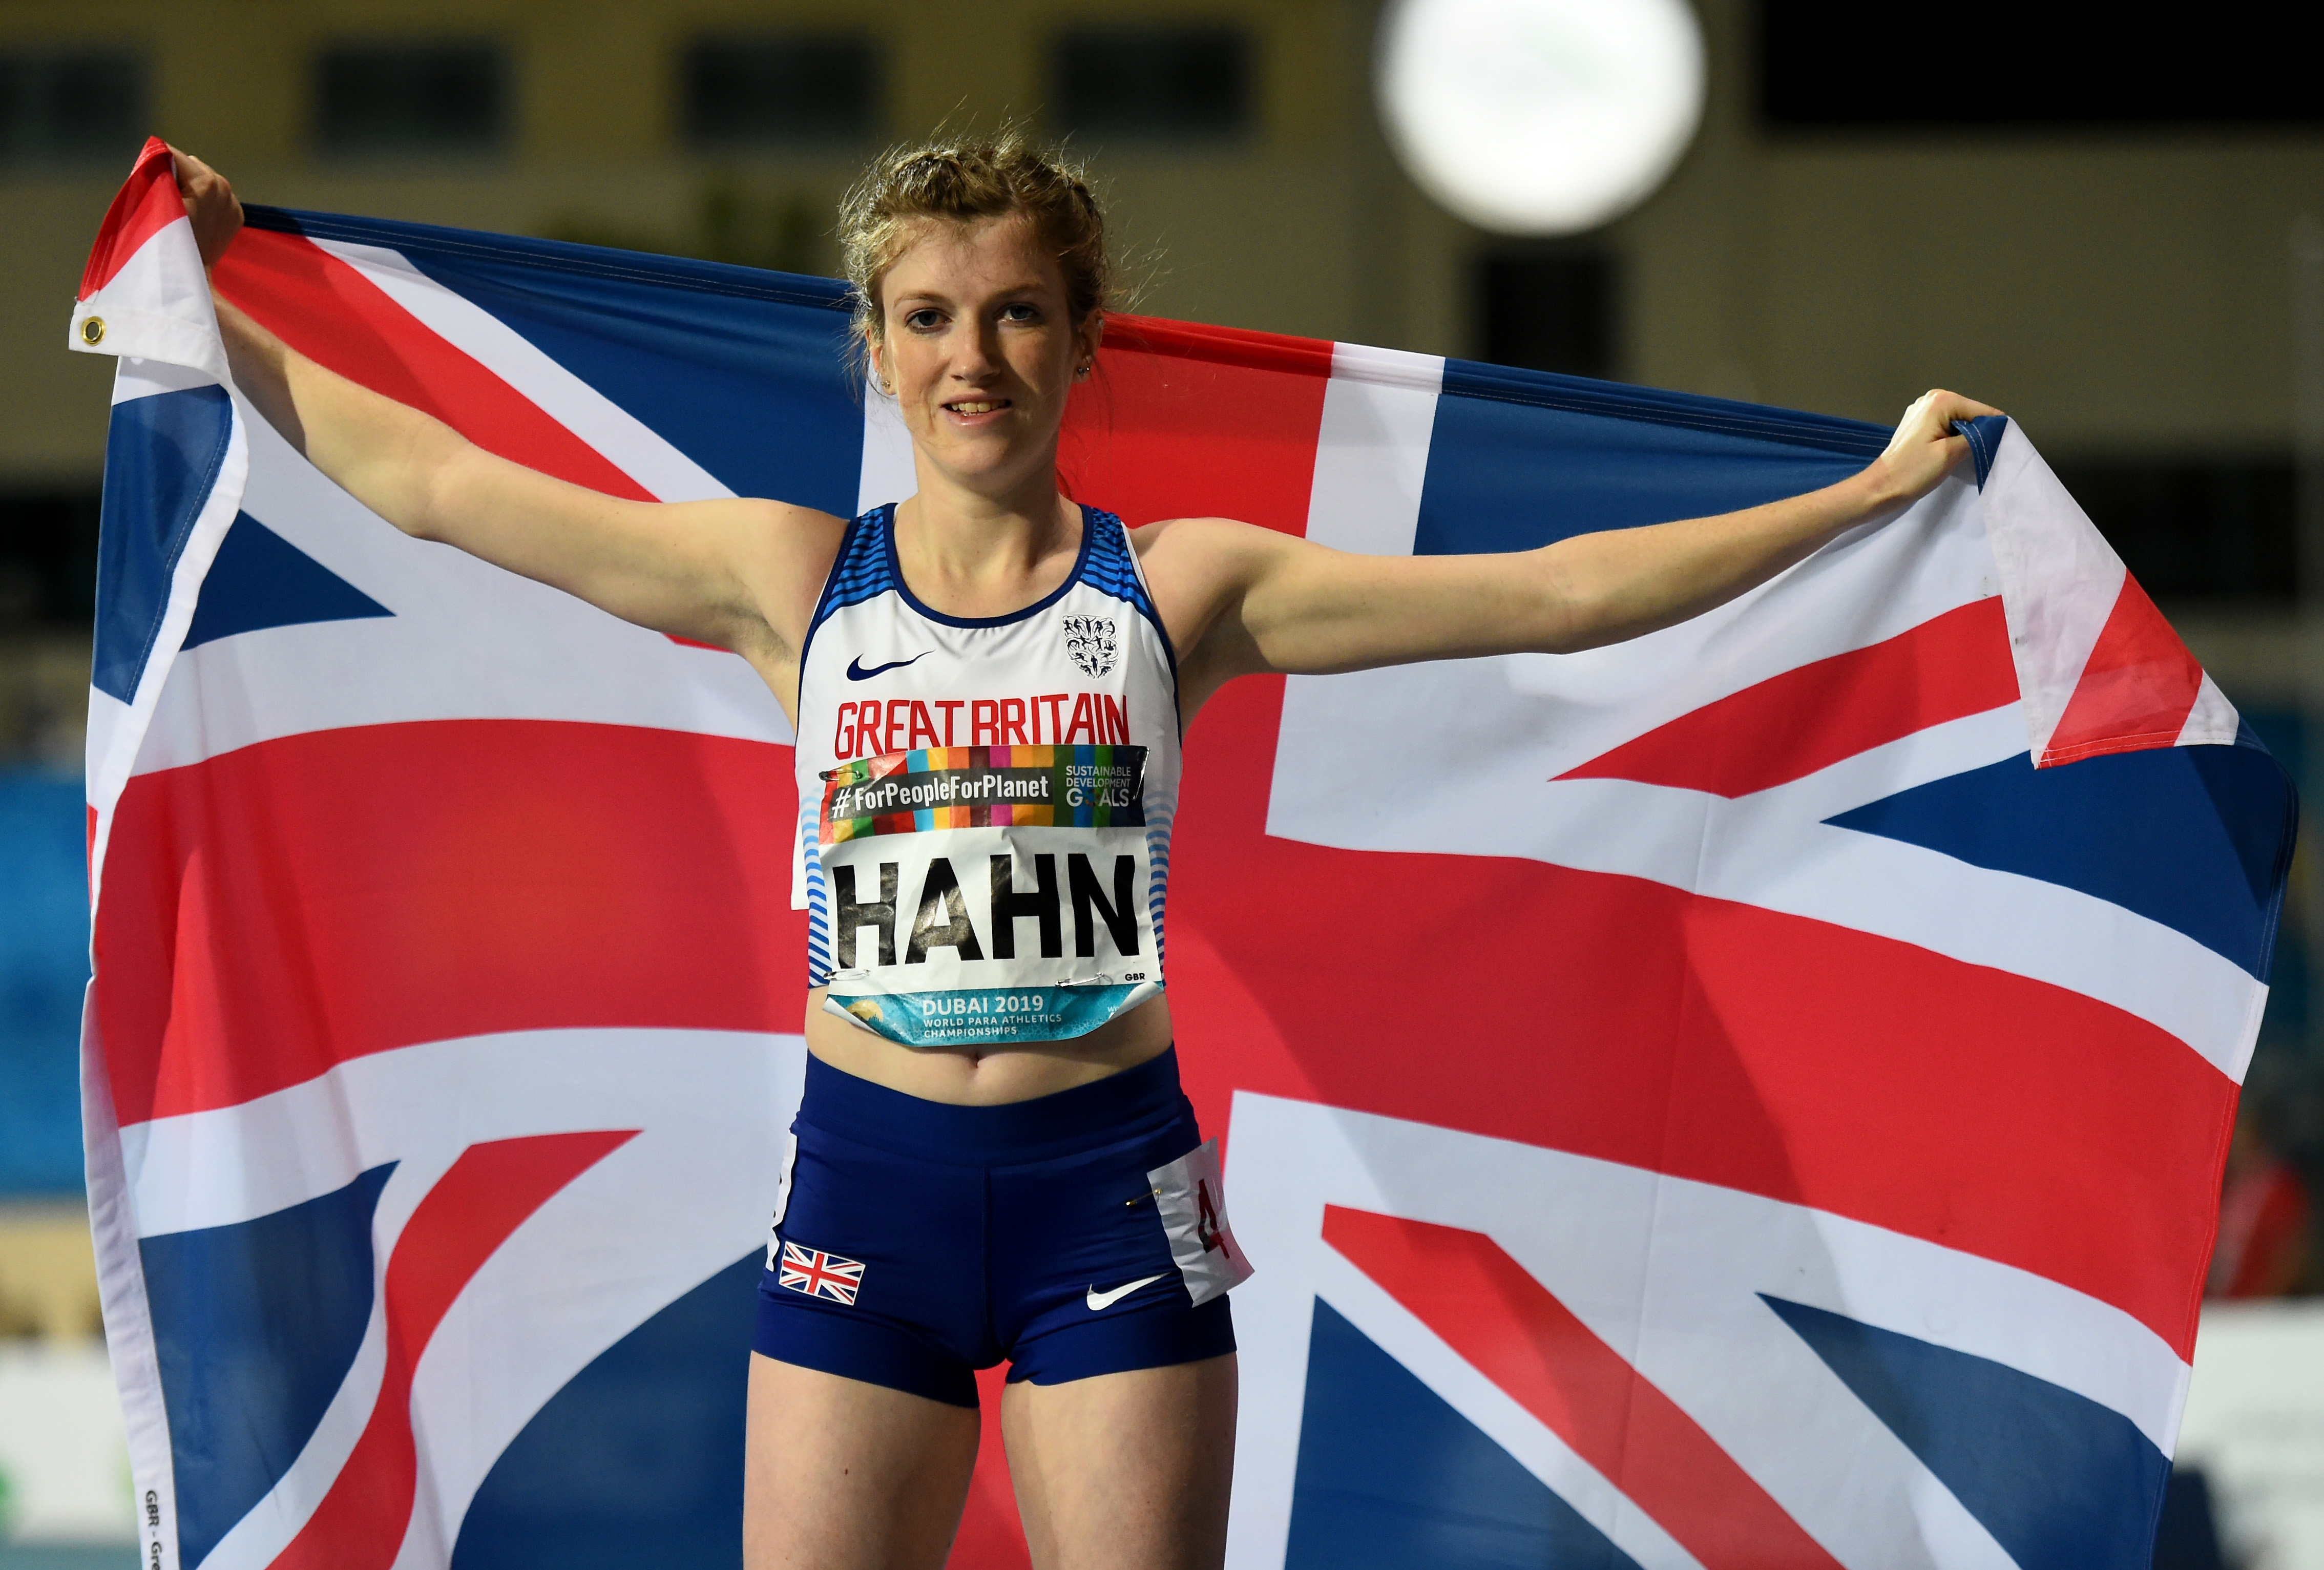 HAHN CAPTURES WORLD TITLE NUMBER SEVEN IN RECORD-BREAKING STYLE